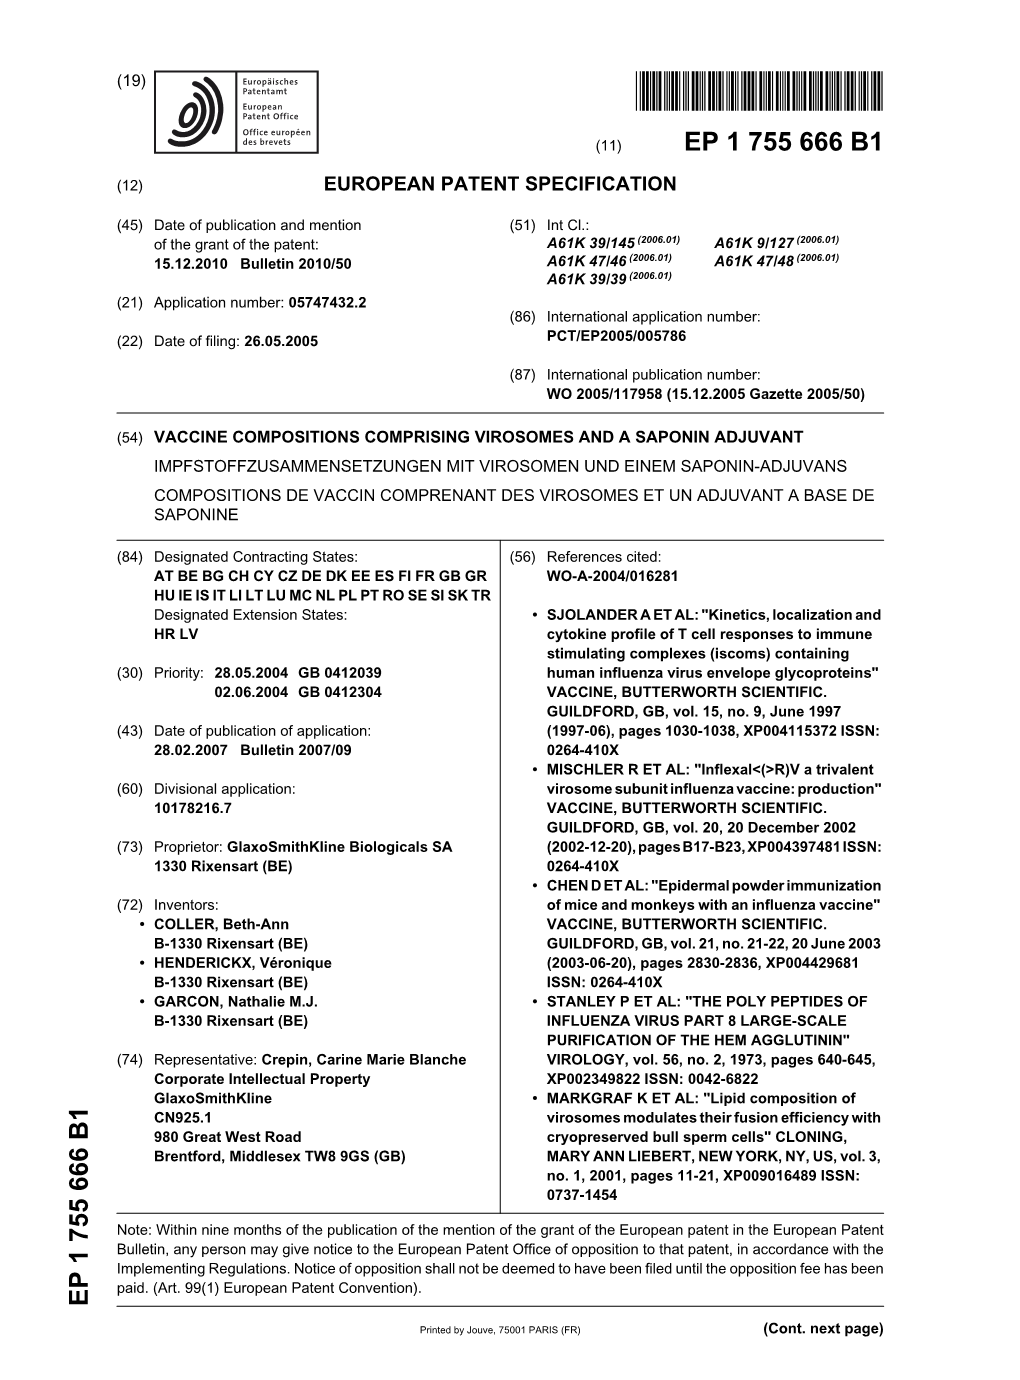 Vaccine Compositions Comprising Virosomes and A